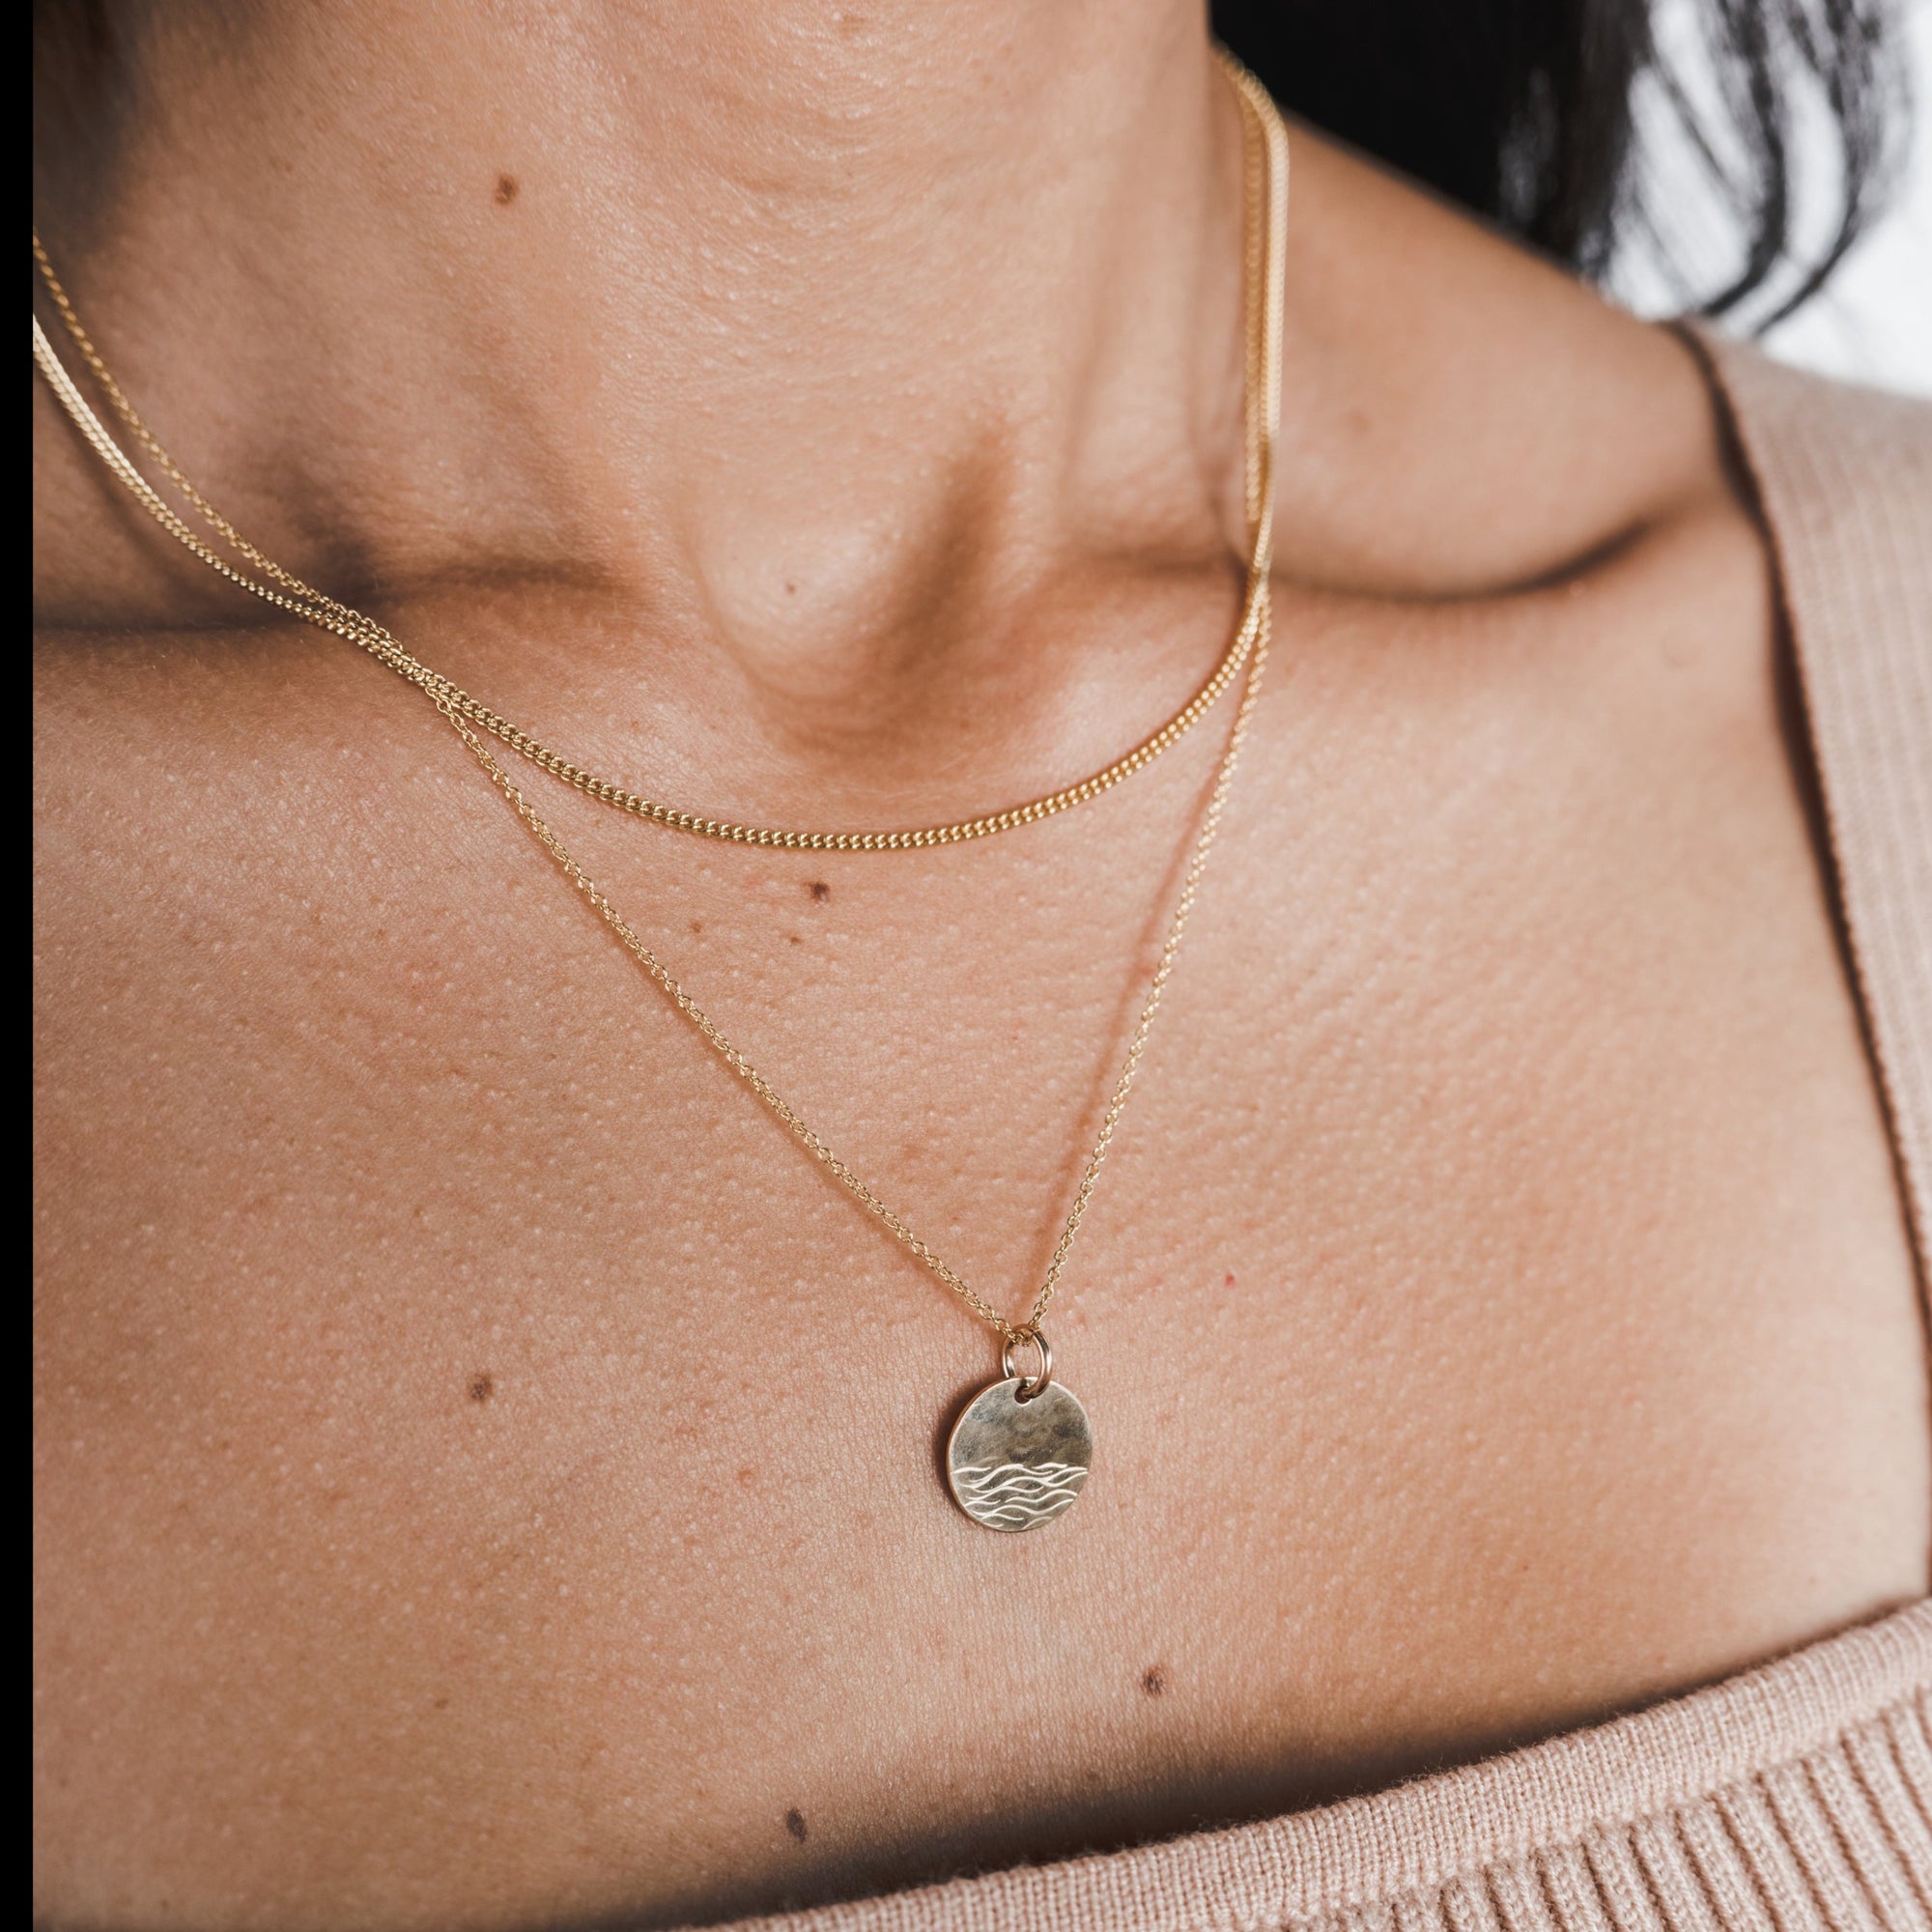 A close-up of a woman&#39;s neck showing a Curb Chain Necklace with a pendant from Becoming Jewelry.